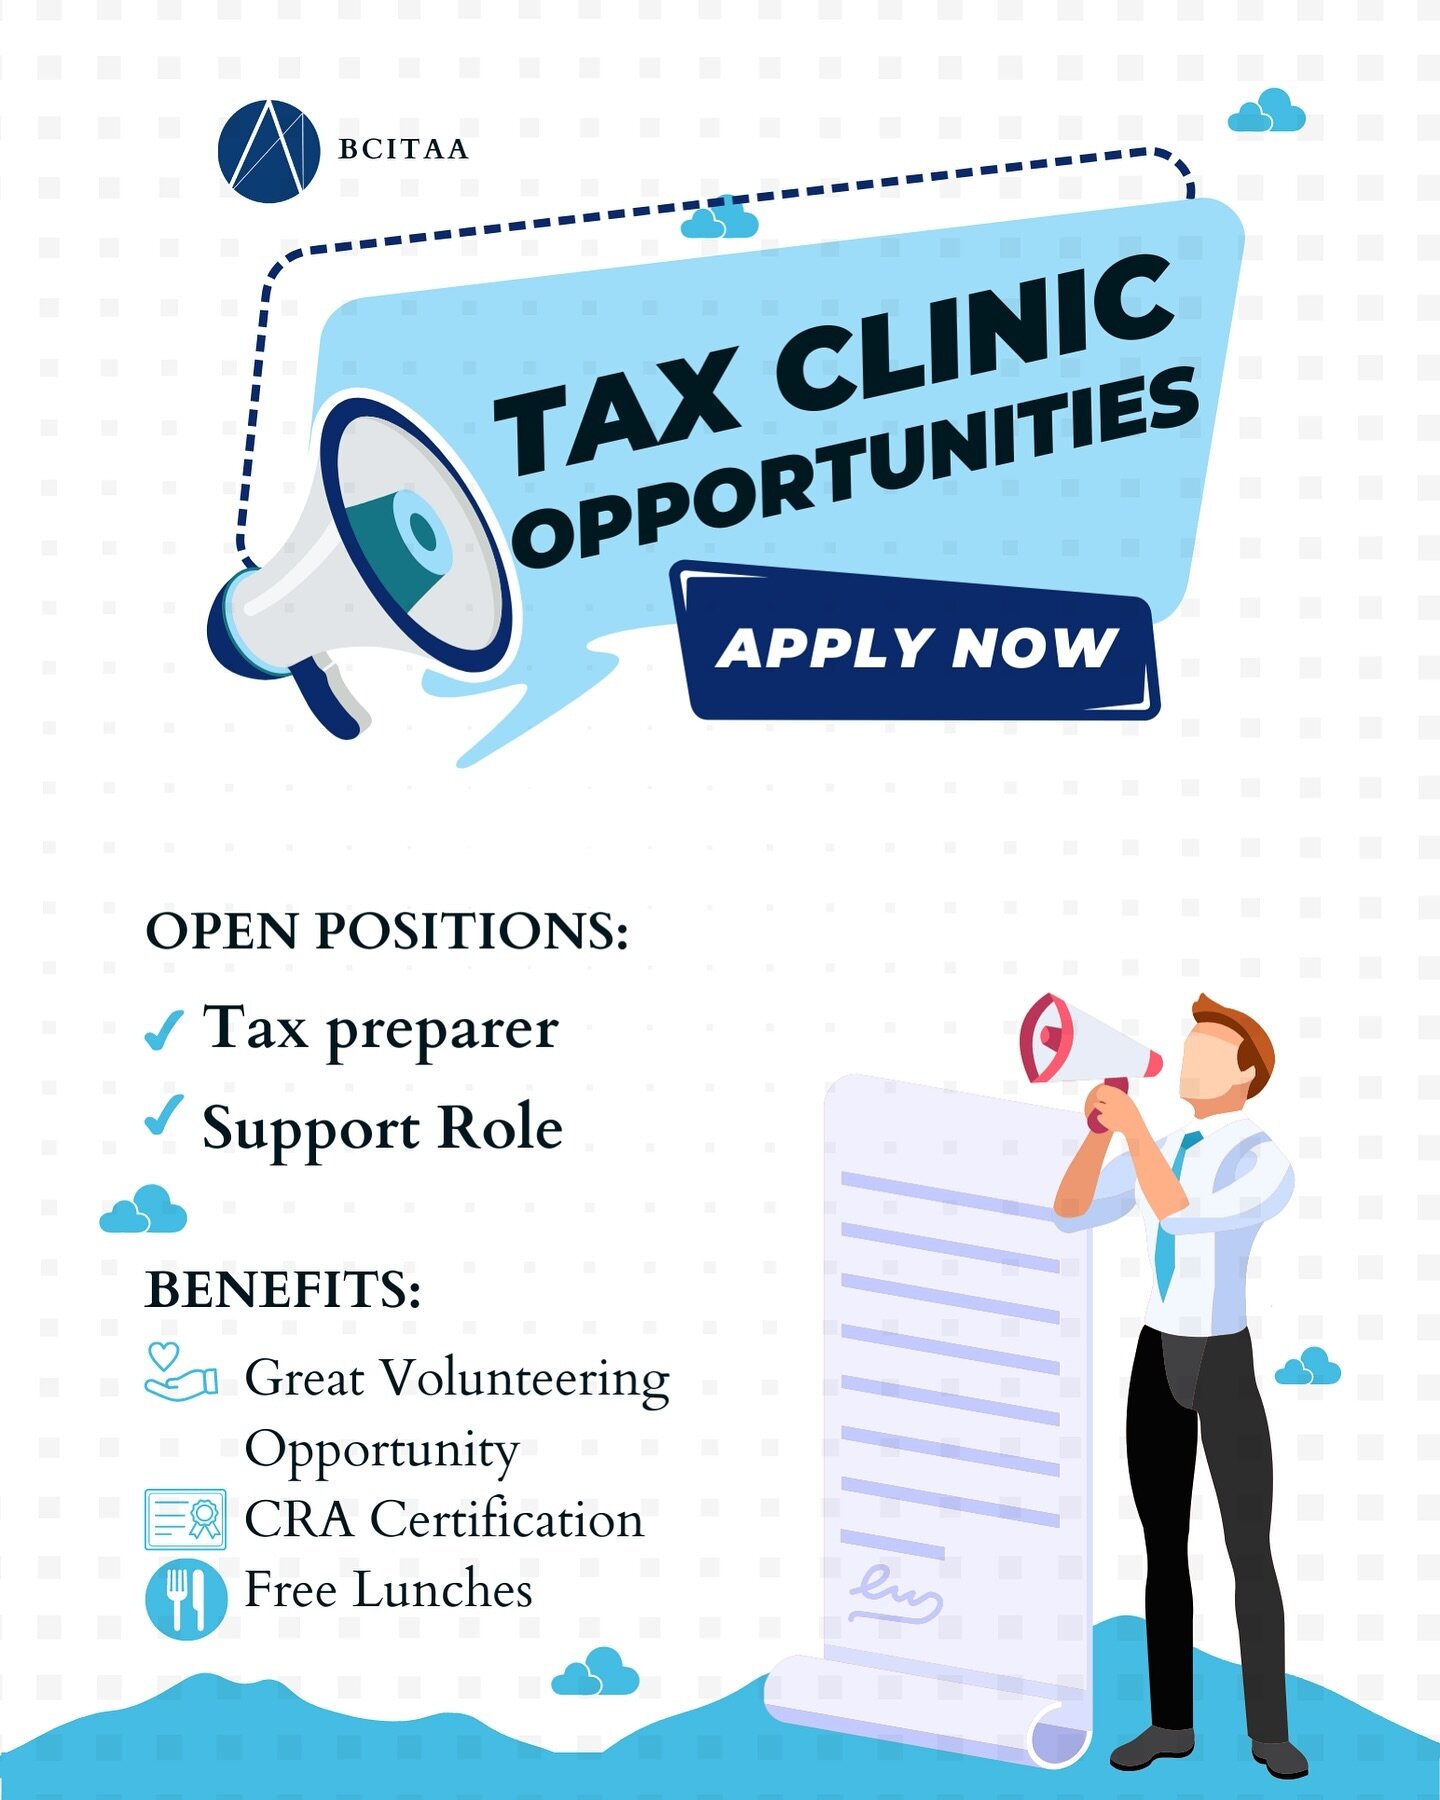 Looking for experience to put on your resume? Look no further! The BCIT Accounting Association is hosting the Tax Clinics on April 3rd, 10th and 17th on the Burnaby Campus and April 2nd on the Downtown Campus. Join our Tax Clinic as a Volunteer to be